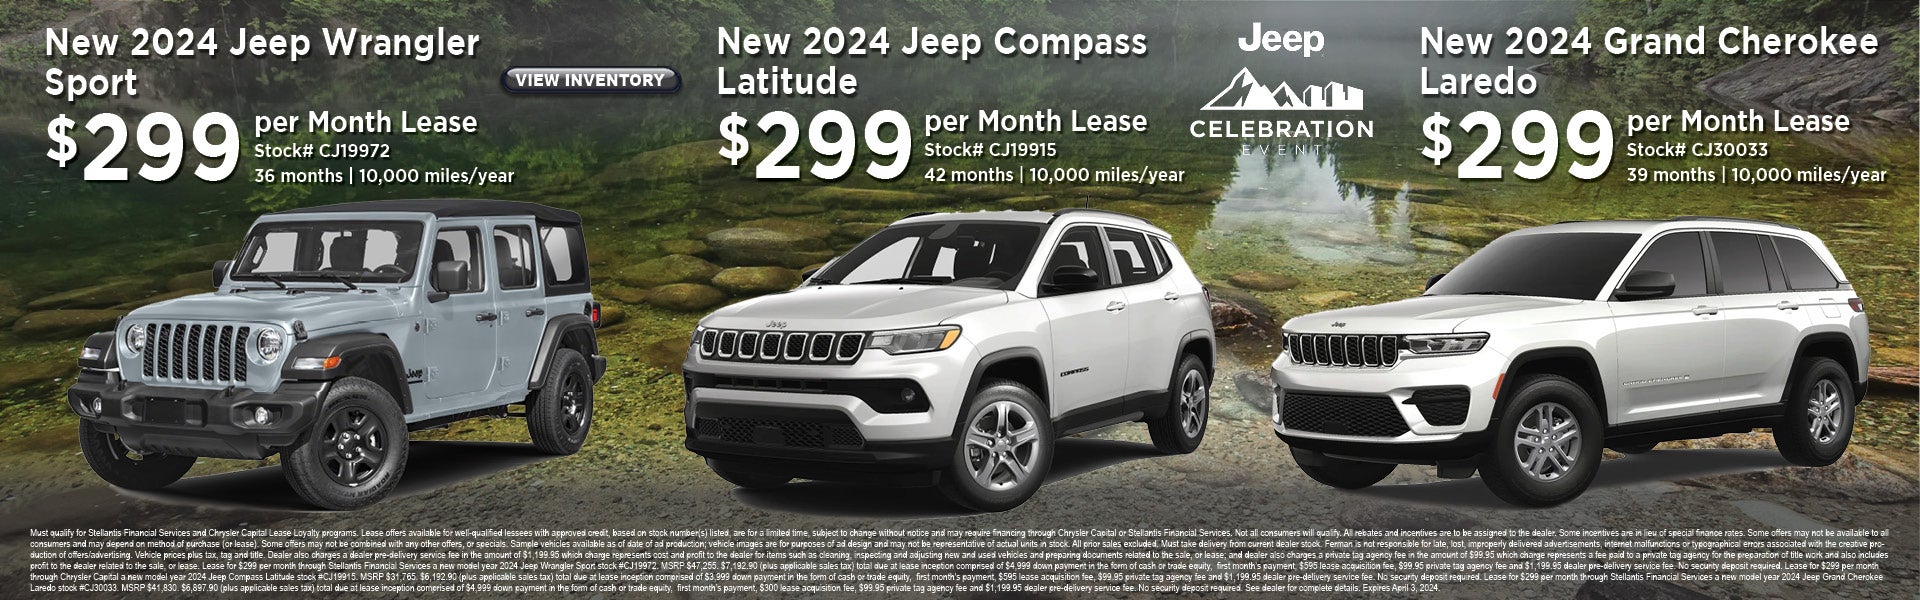 March Leases on New Jeep Wrangler, Compass & Grand Cherokee